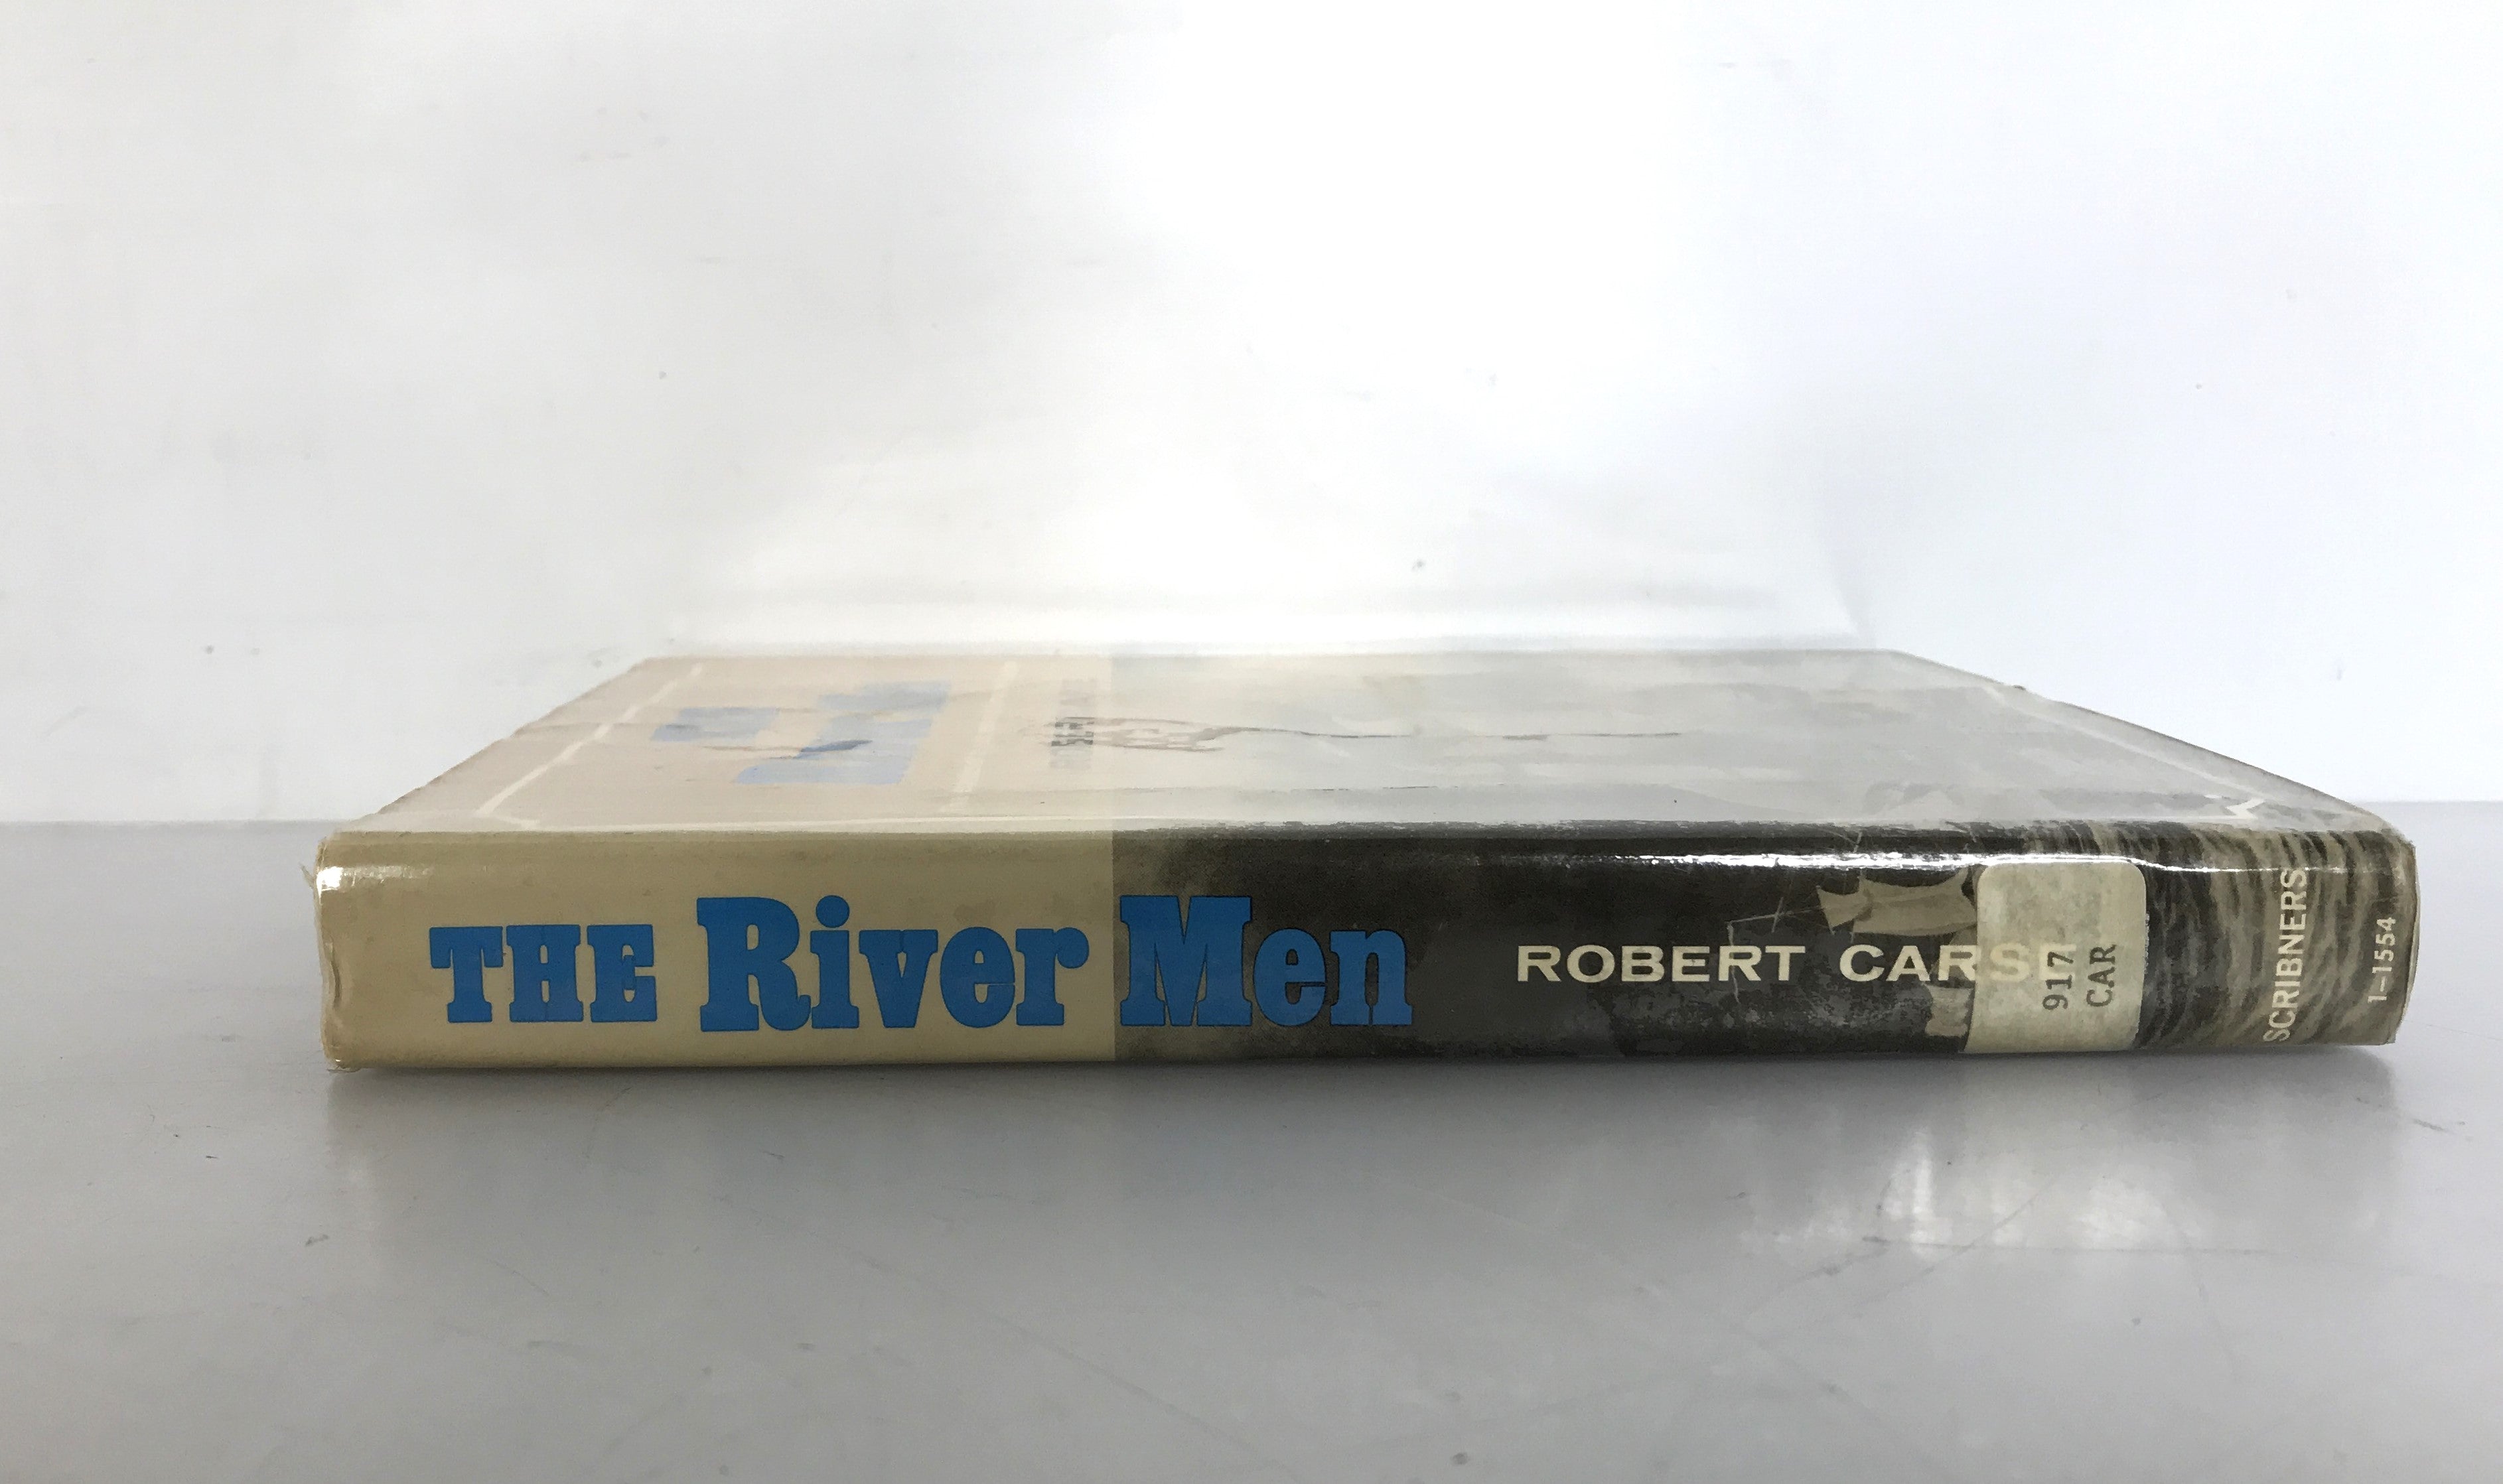 The River Men by Robert Carse First Edition 1969 HC DJ